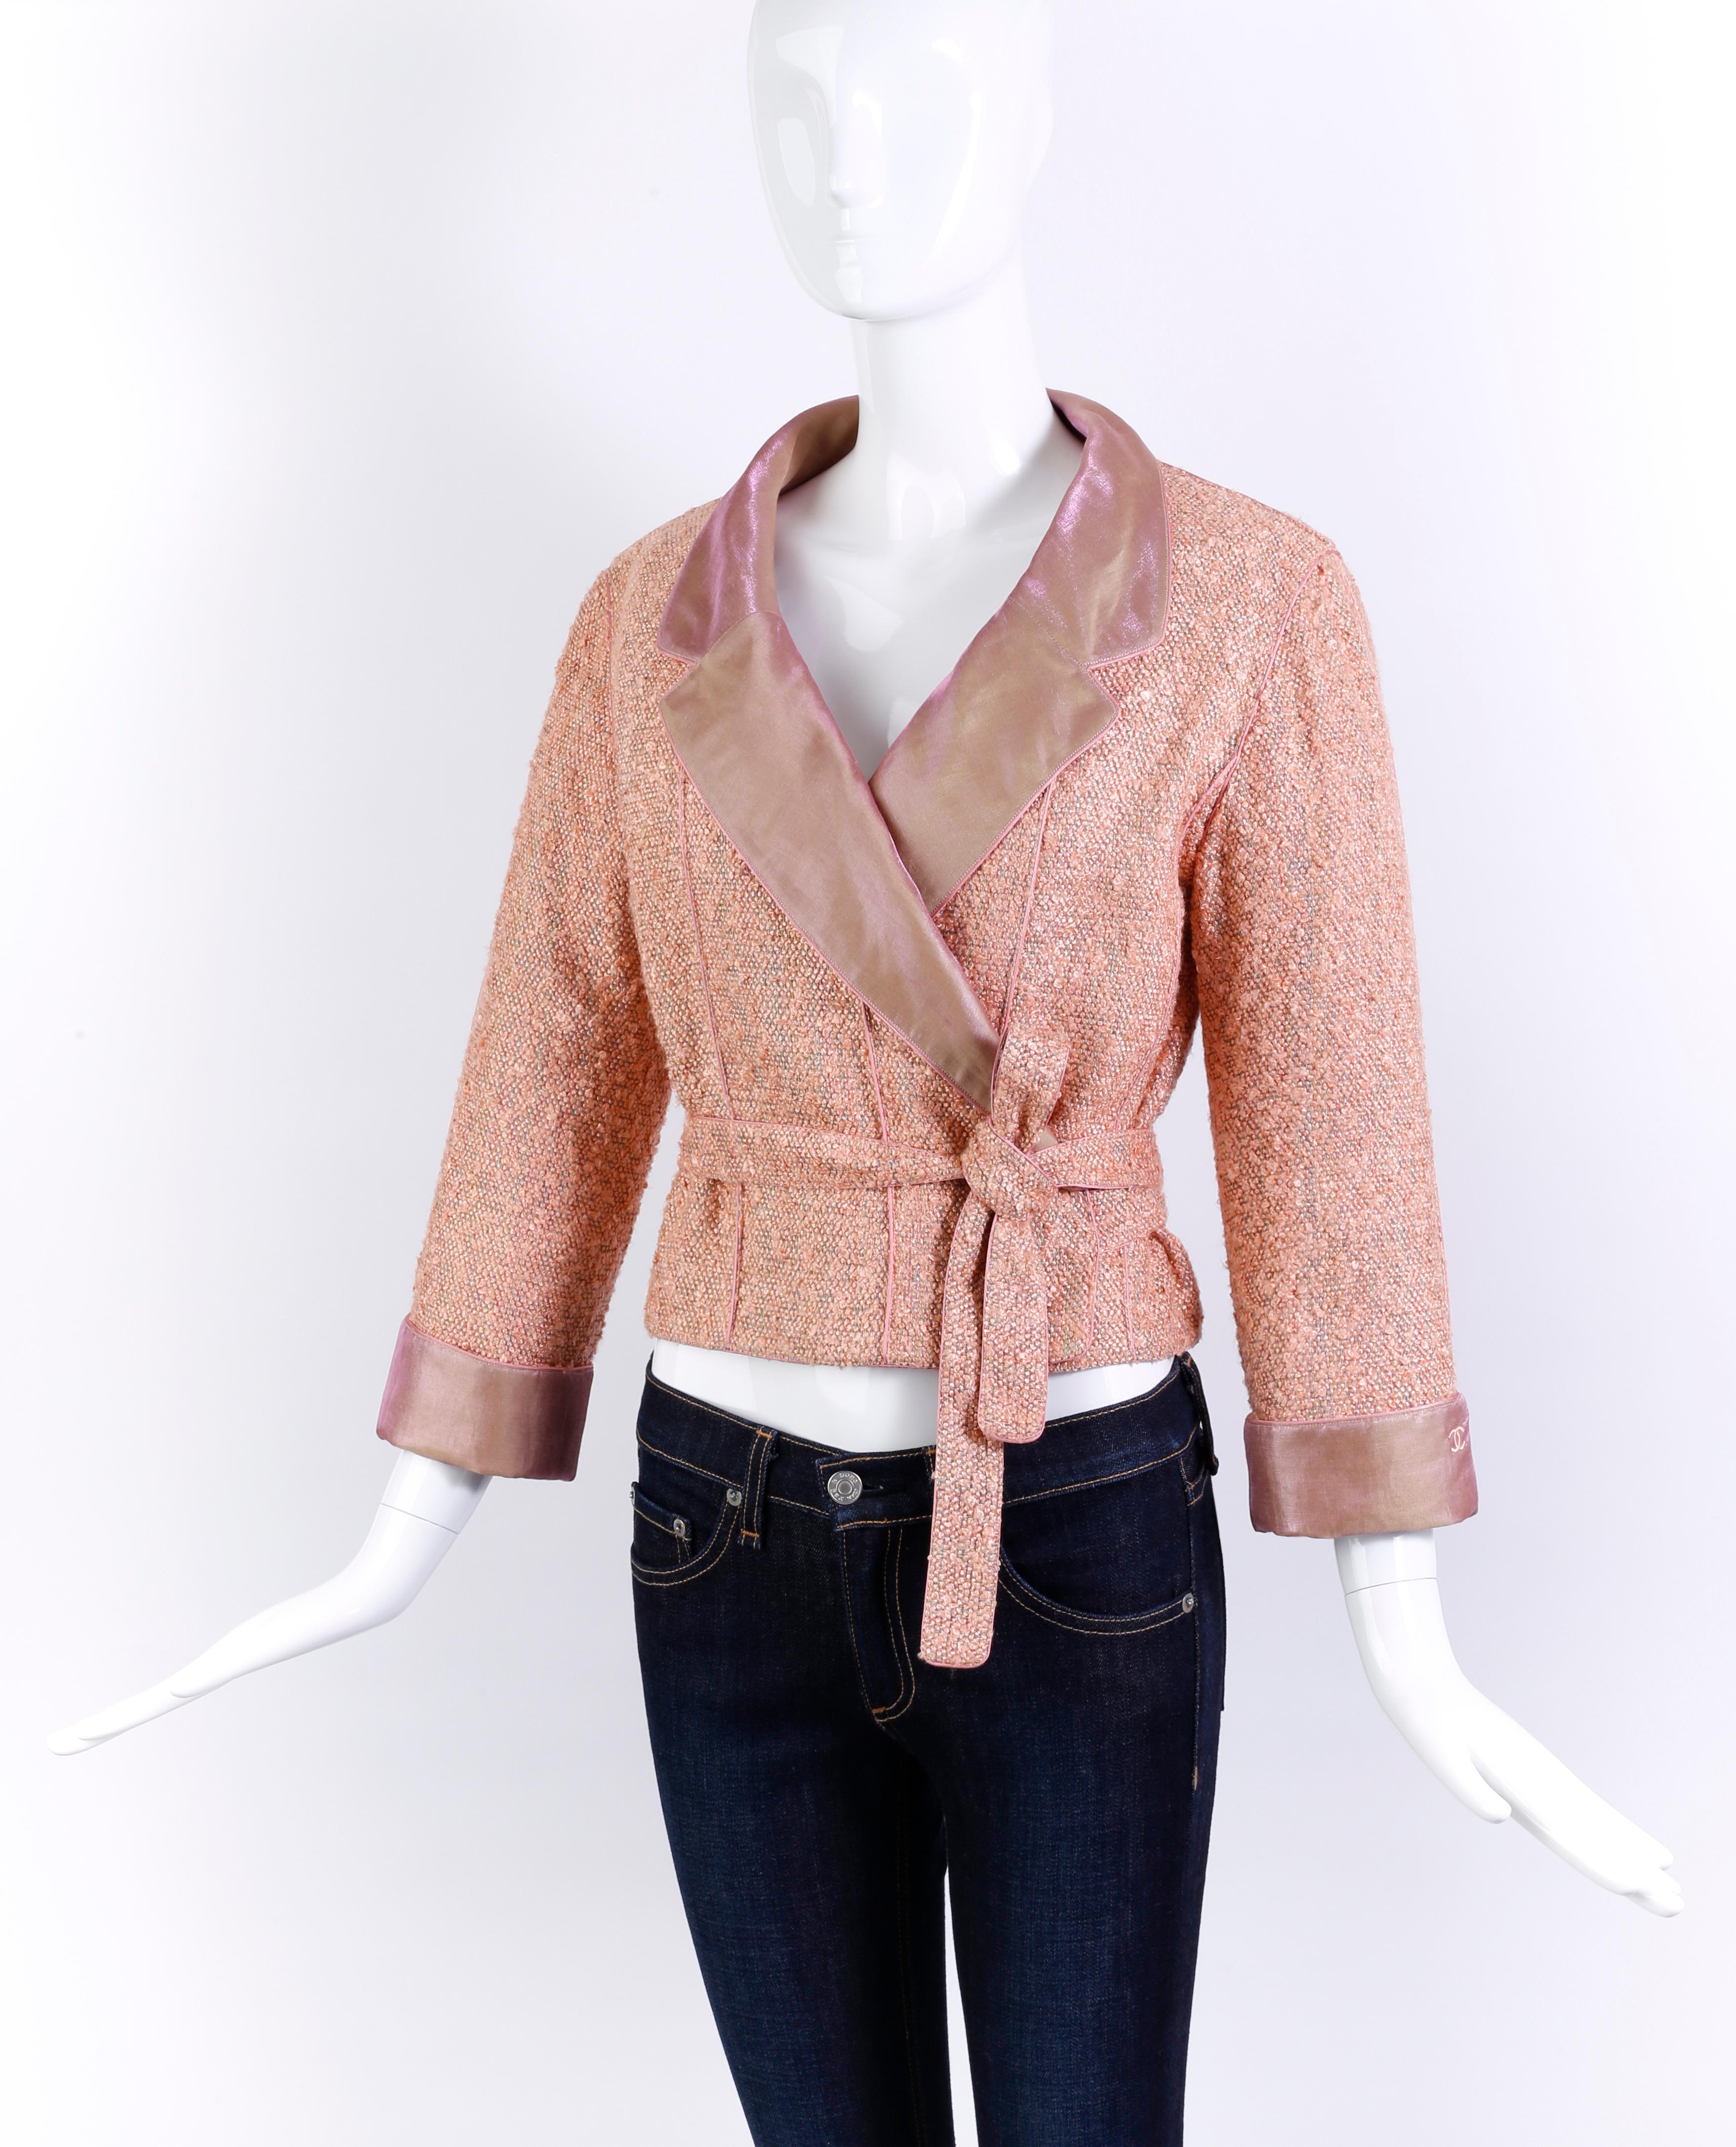 CHANEL Vintage S/S 1999 Salmon Pink Tweed Boucle Knit Cropped Wrap Jacket 38-FR In Excellent Condition For Sale In Chicago, IL